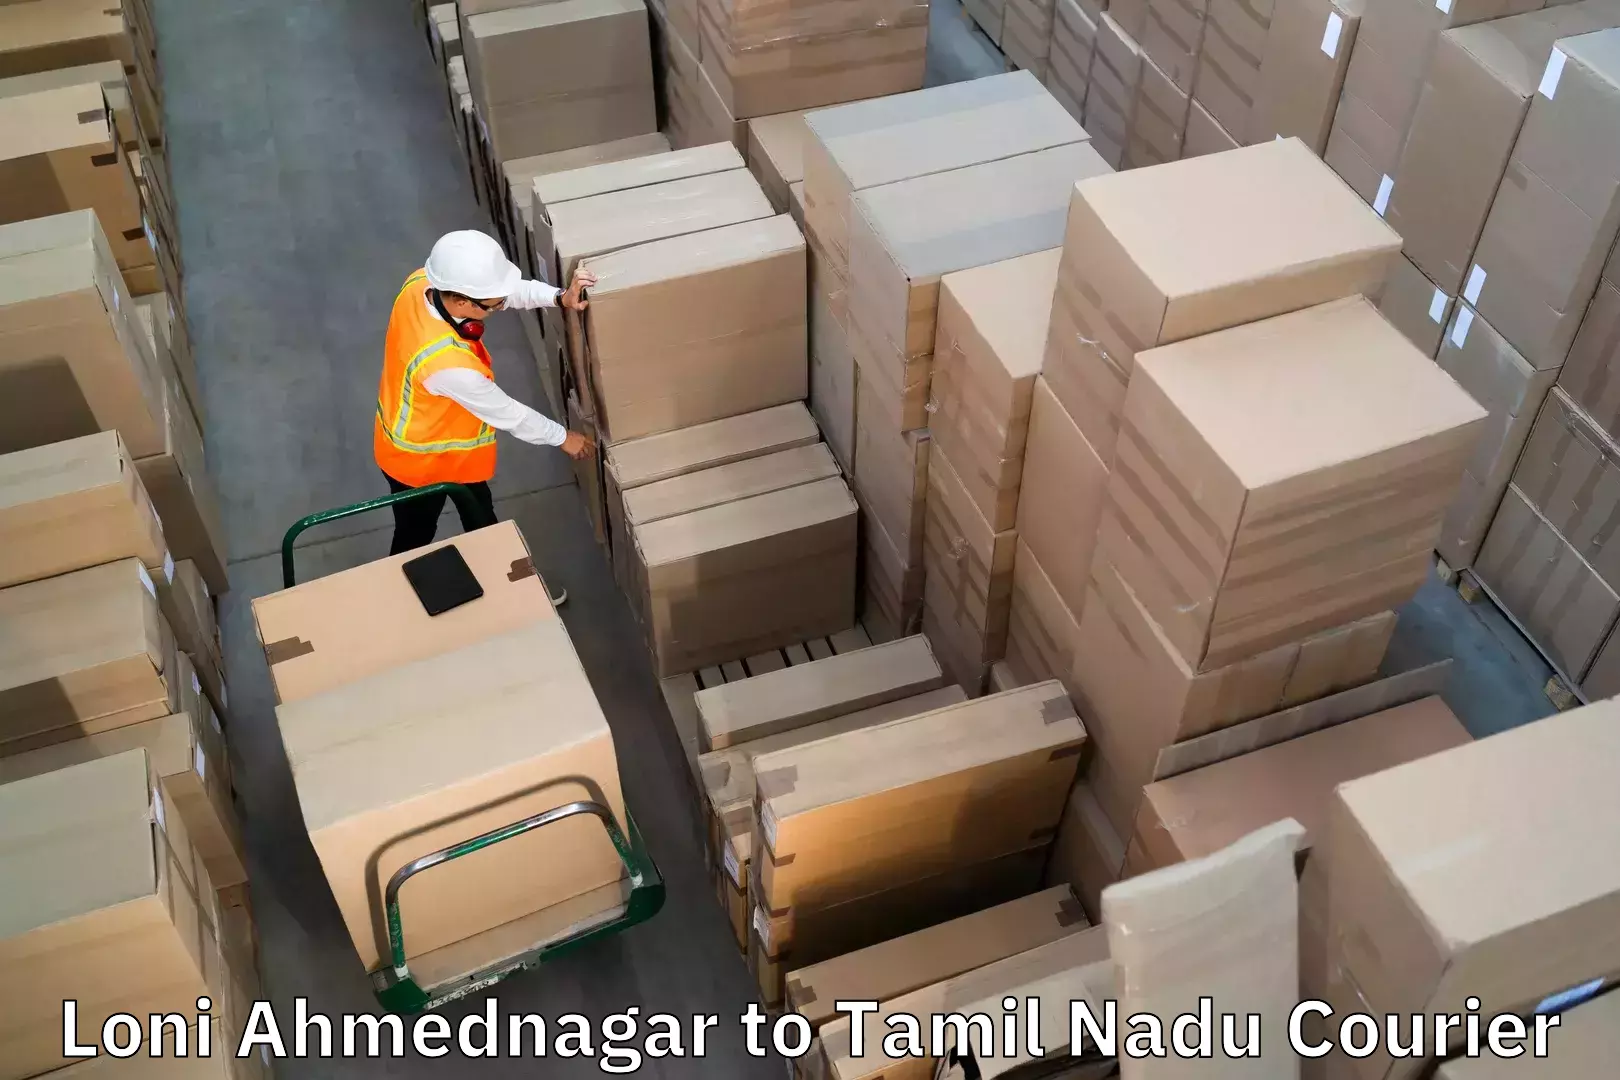 Baggage shipping experts Loni Ahmednagar to Gingee